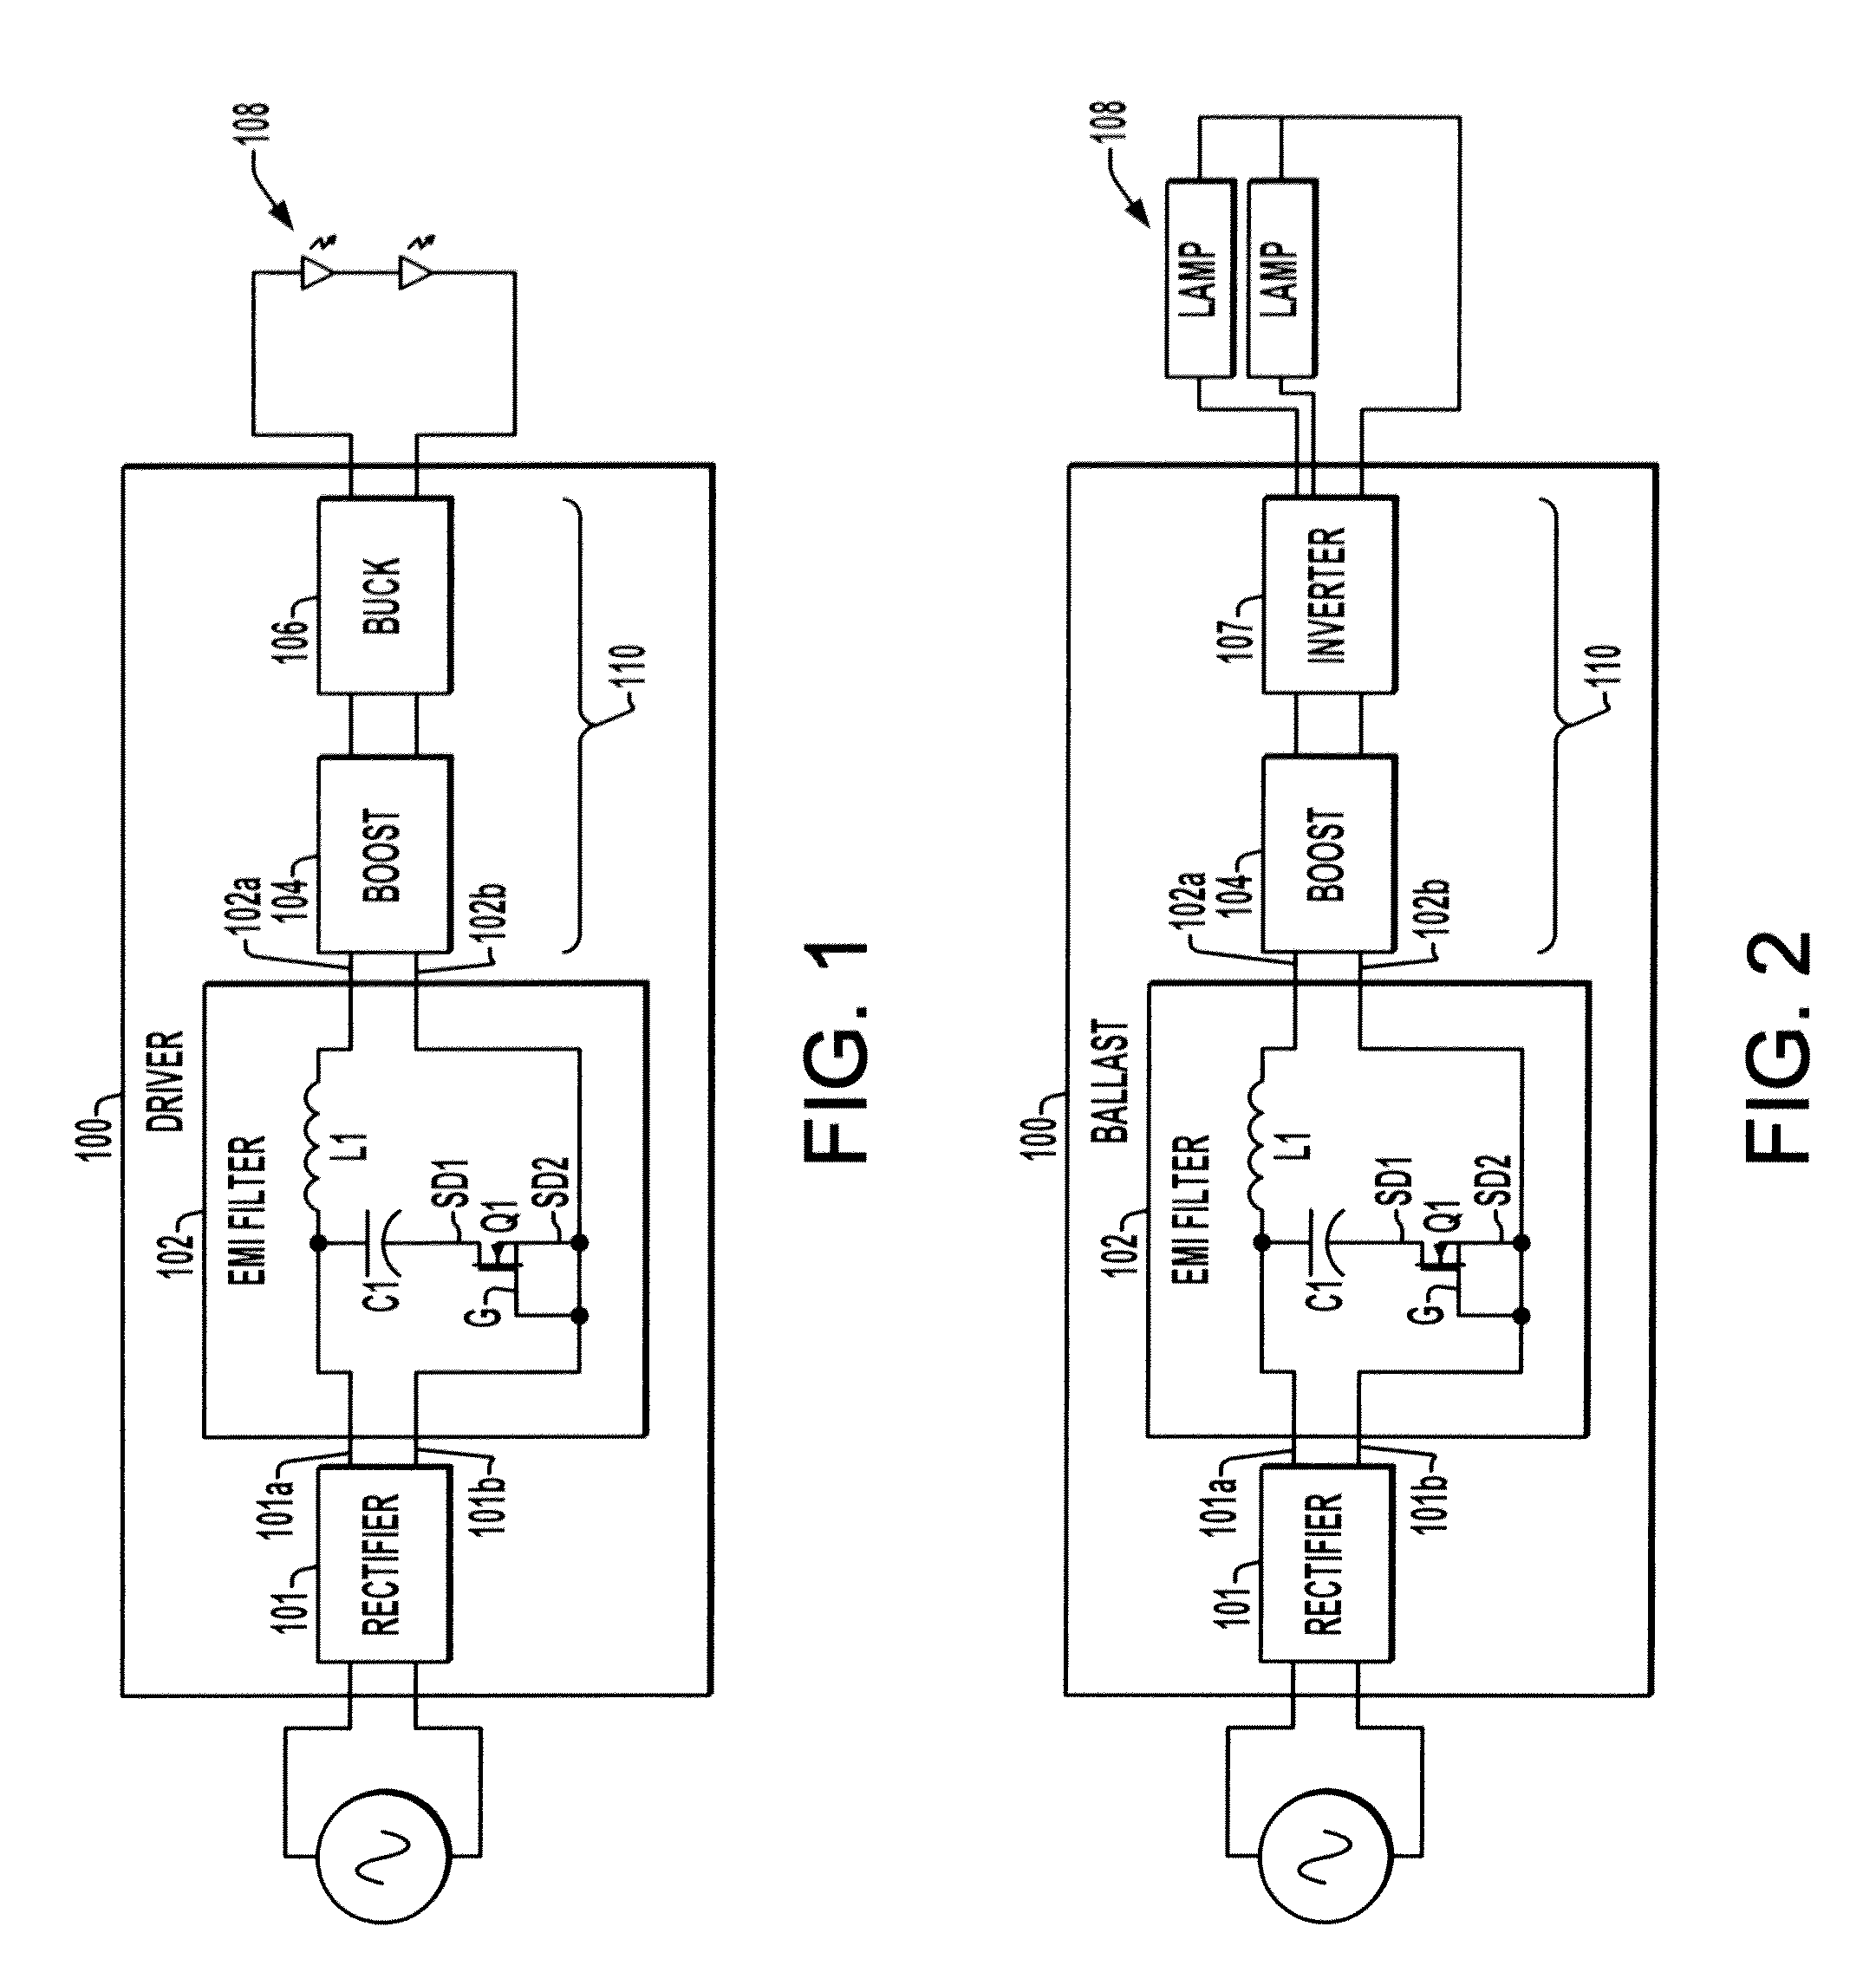 Lighting power circuit with peak current limiter for EMI filter